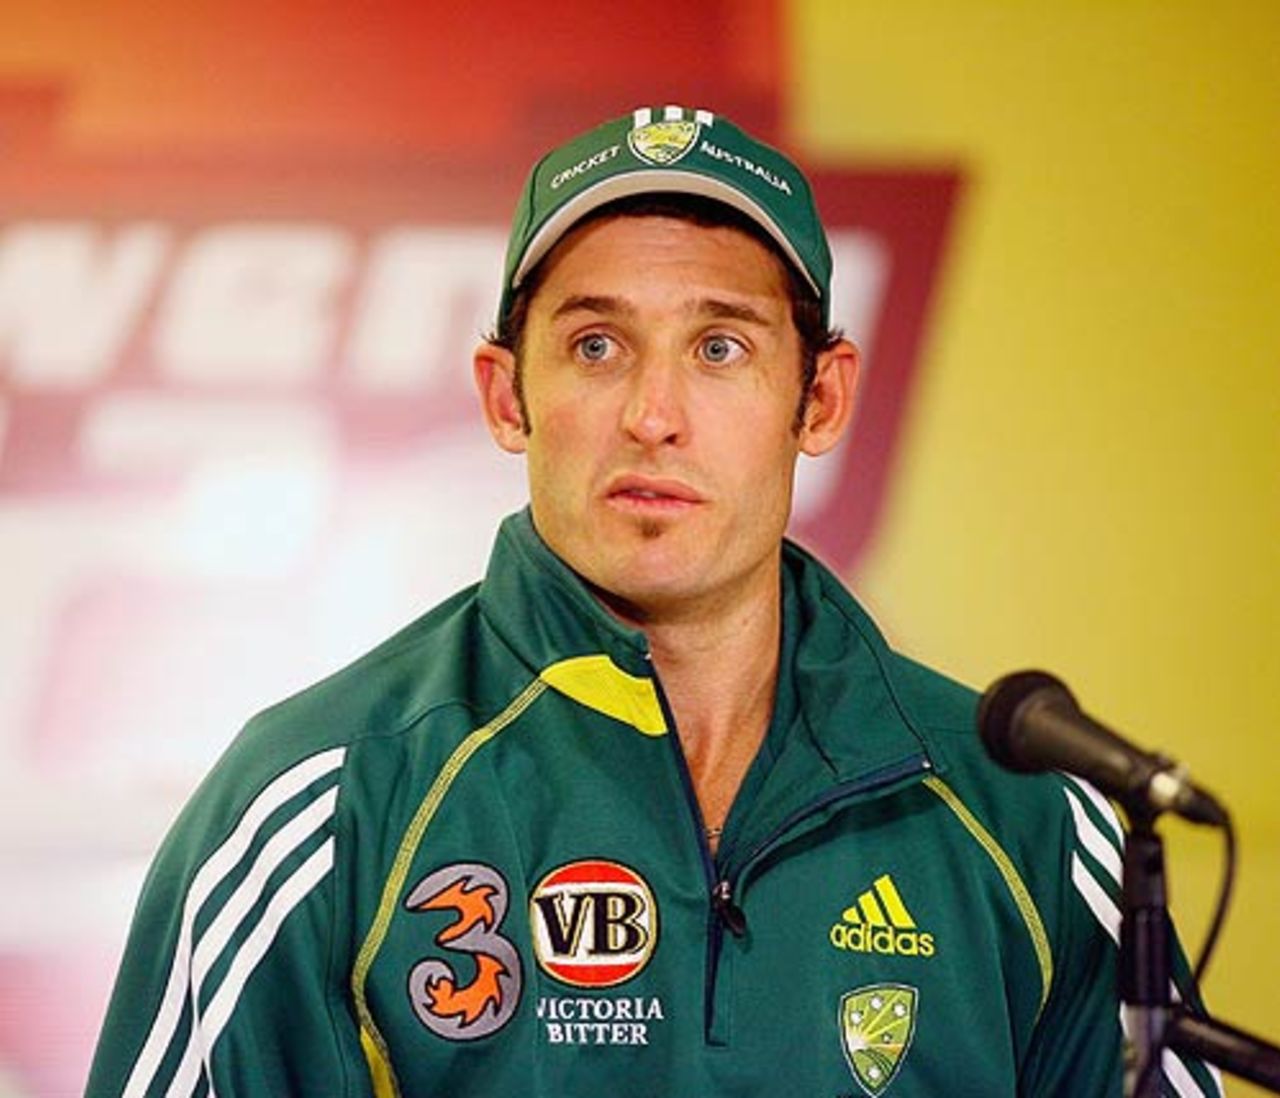 Michael Hussey attends a press conference to promote the inaugral Twenty20 
international between Australia and South Africa, Brisbane, January 8, 2005

